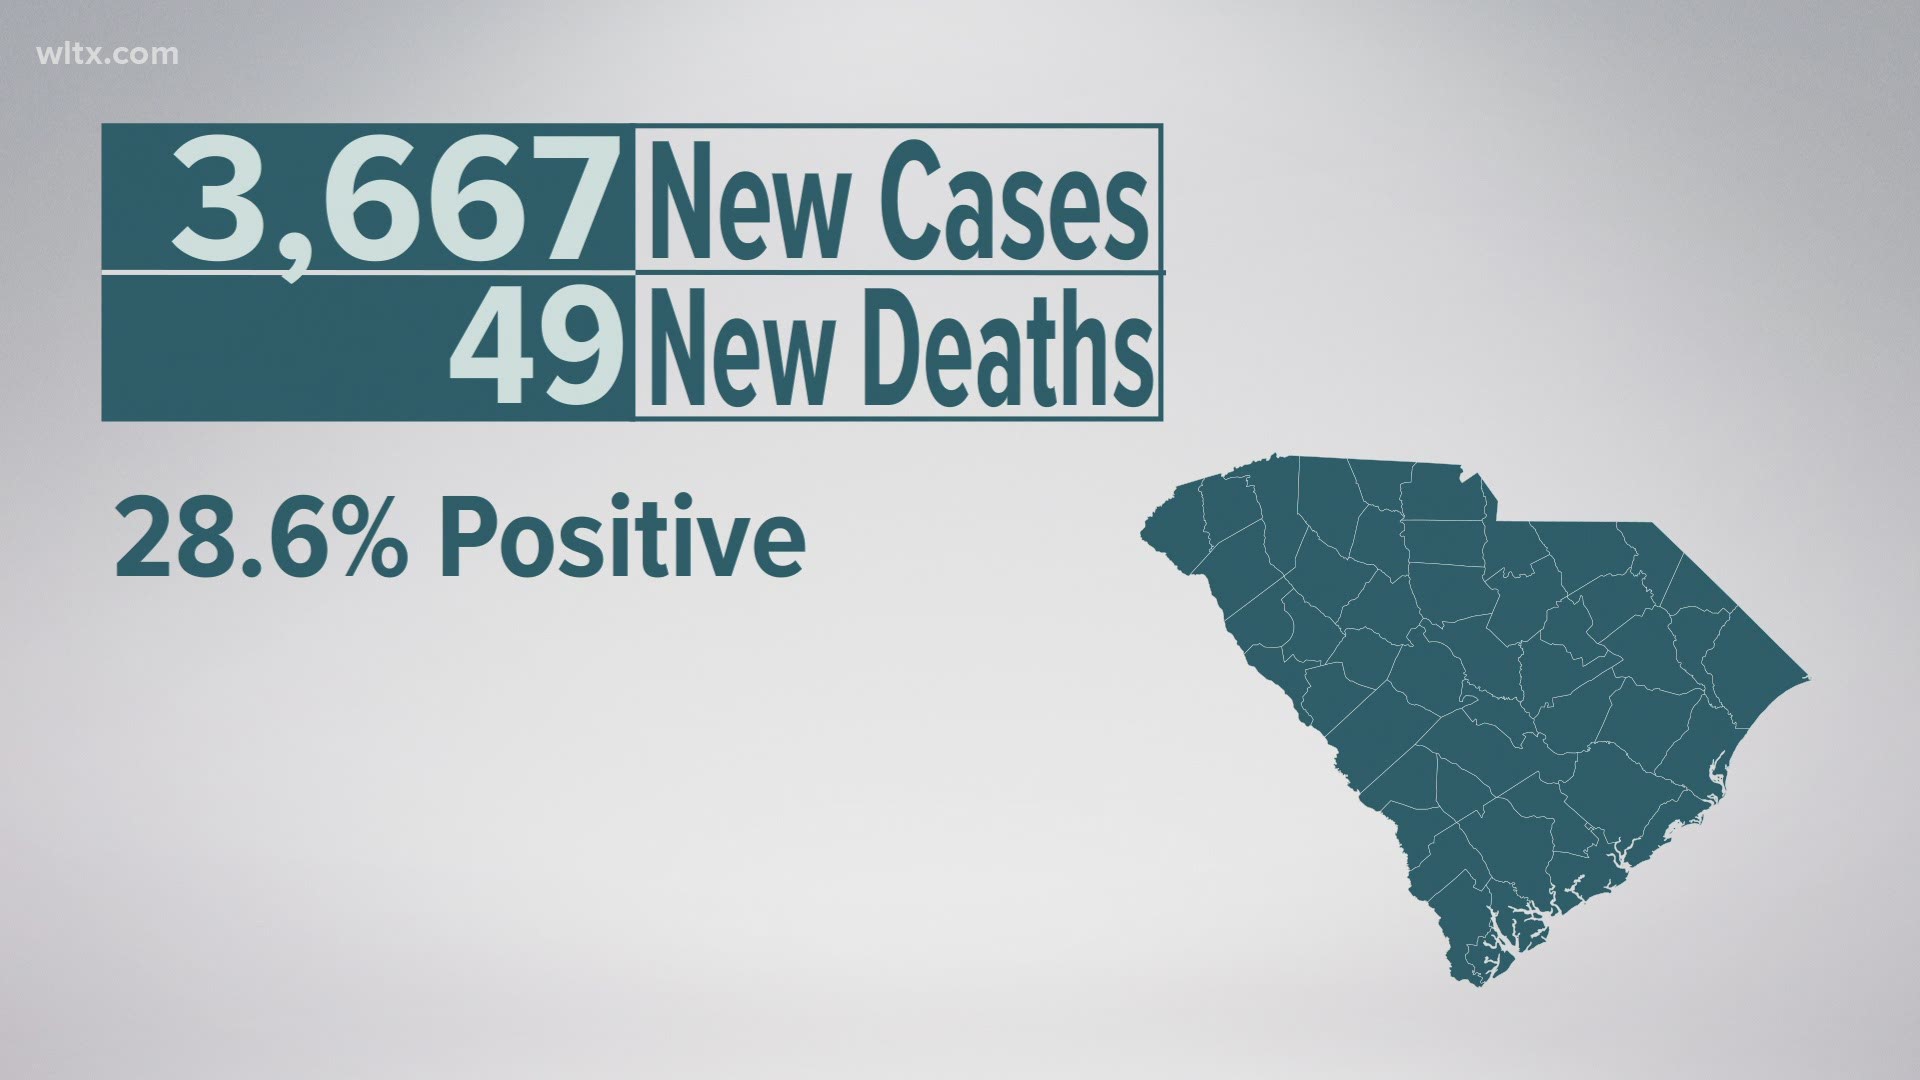 South Carolina Department of Health and Environmental Control reports over 4 million total tests for coronavirus have been performed in the state as of Jan. 8